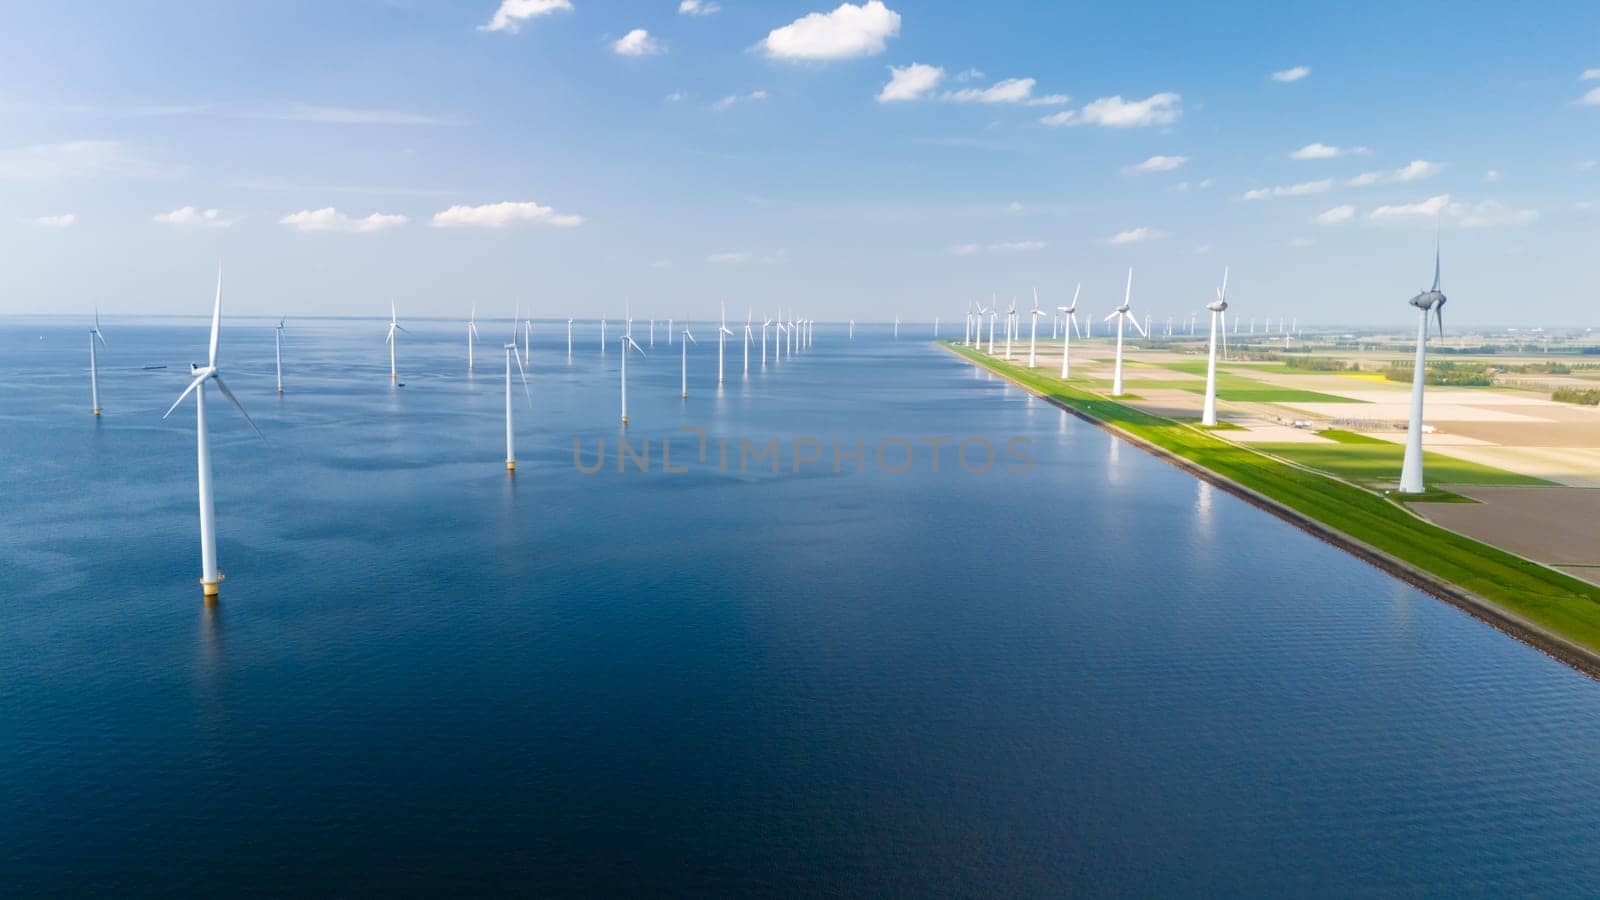 A serene scene of vast water surrounded by elegant windmills in Flevoland, Netherlands. The windmills stand tall, harnessing the power of the wind to generate energy.